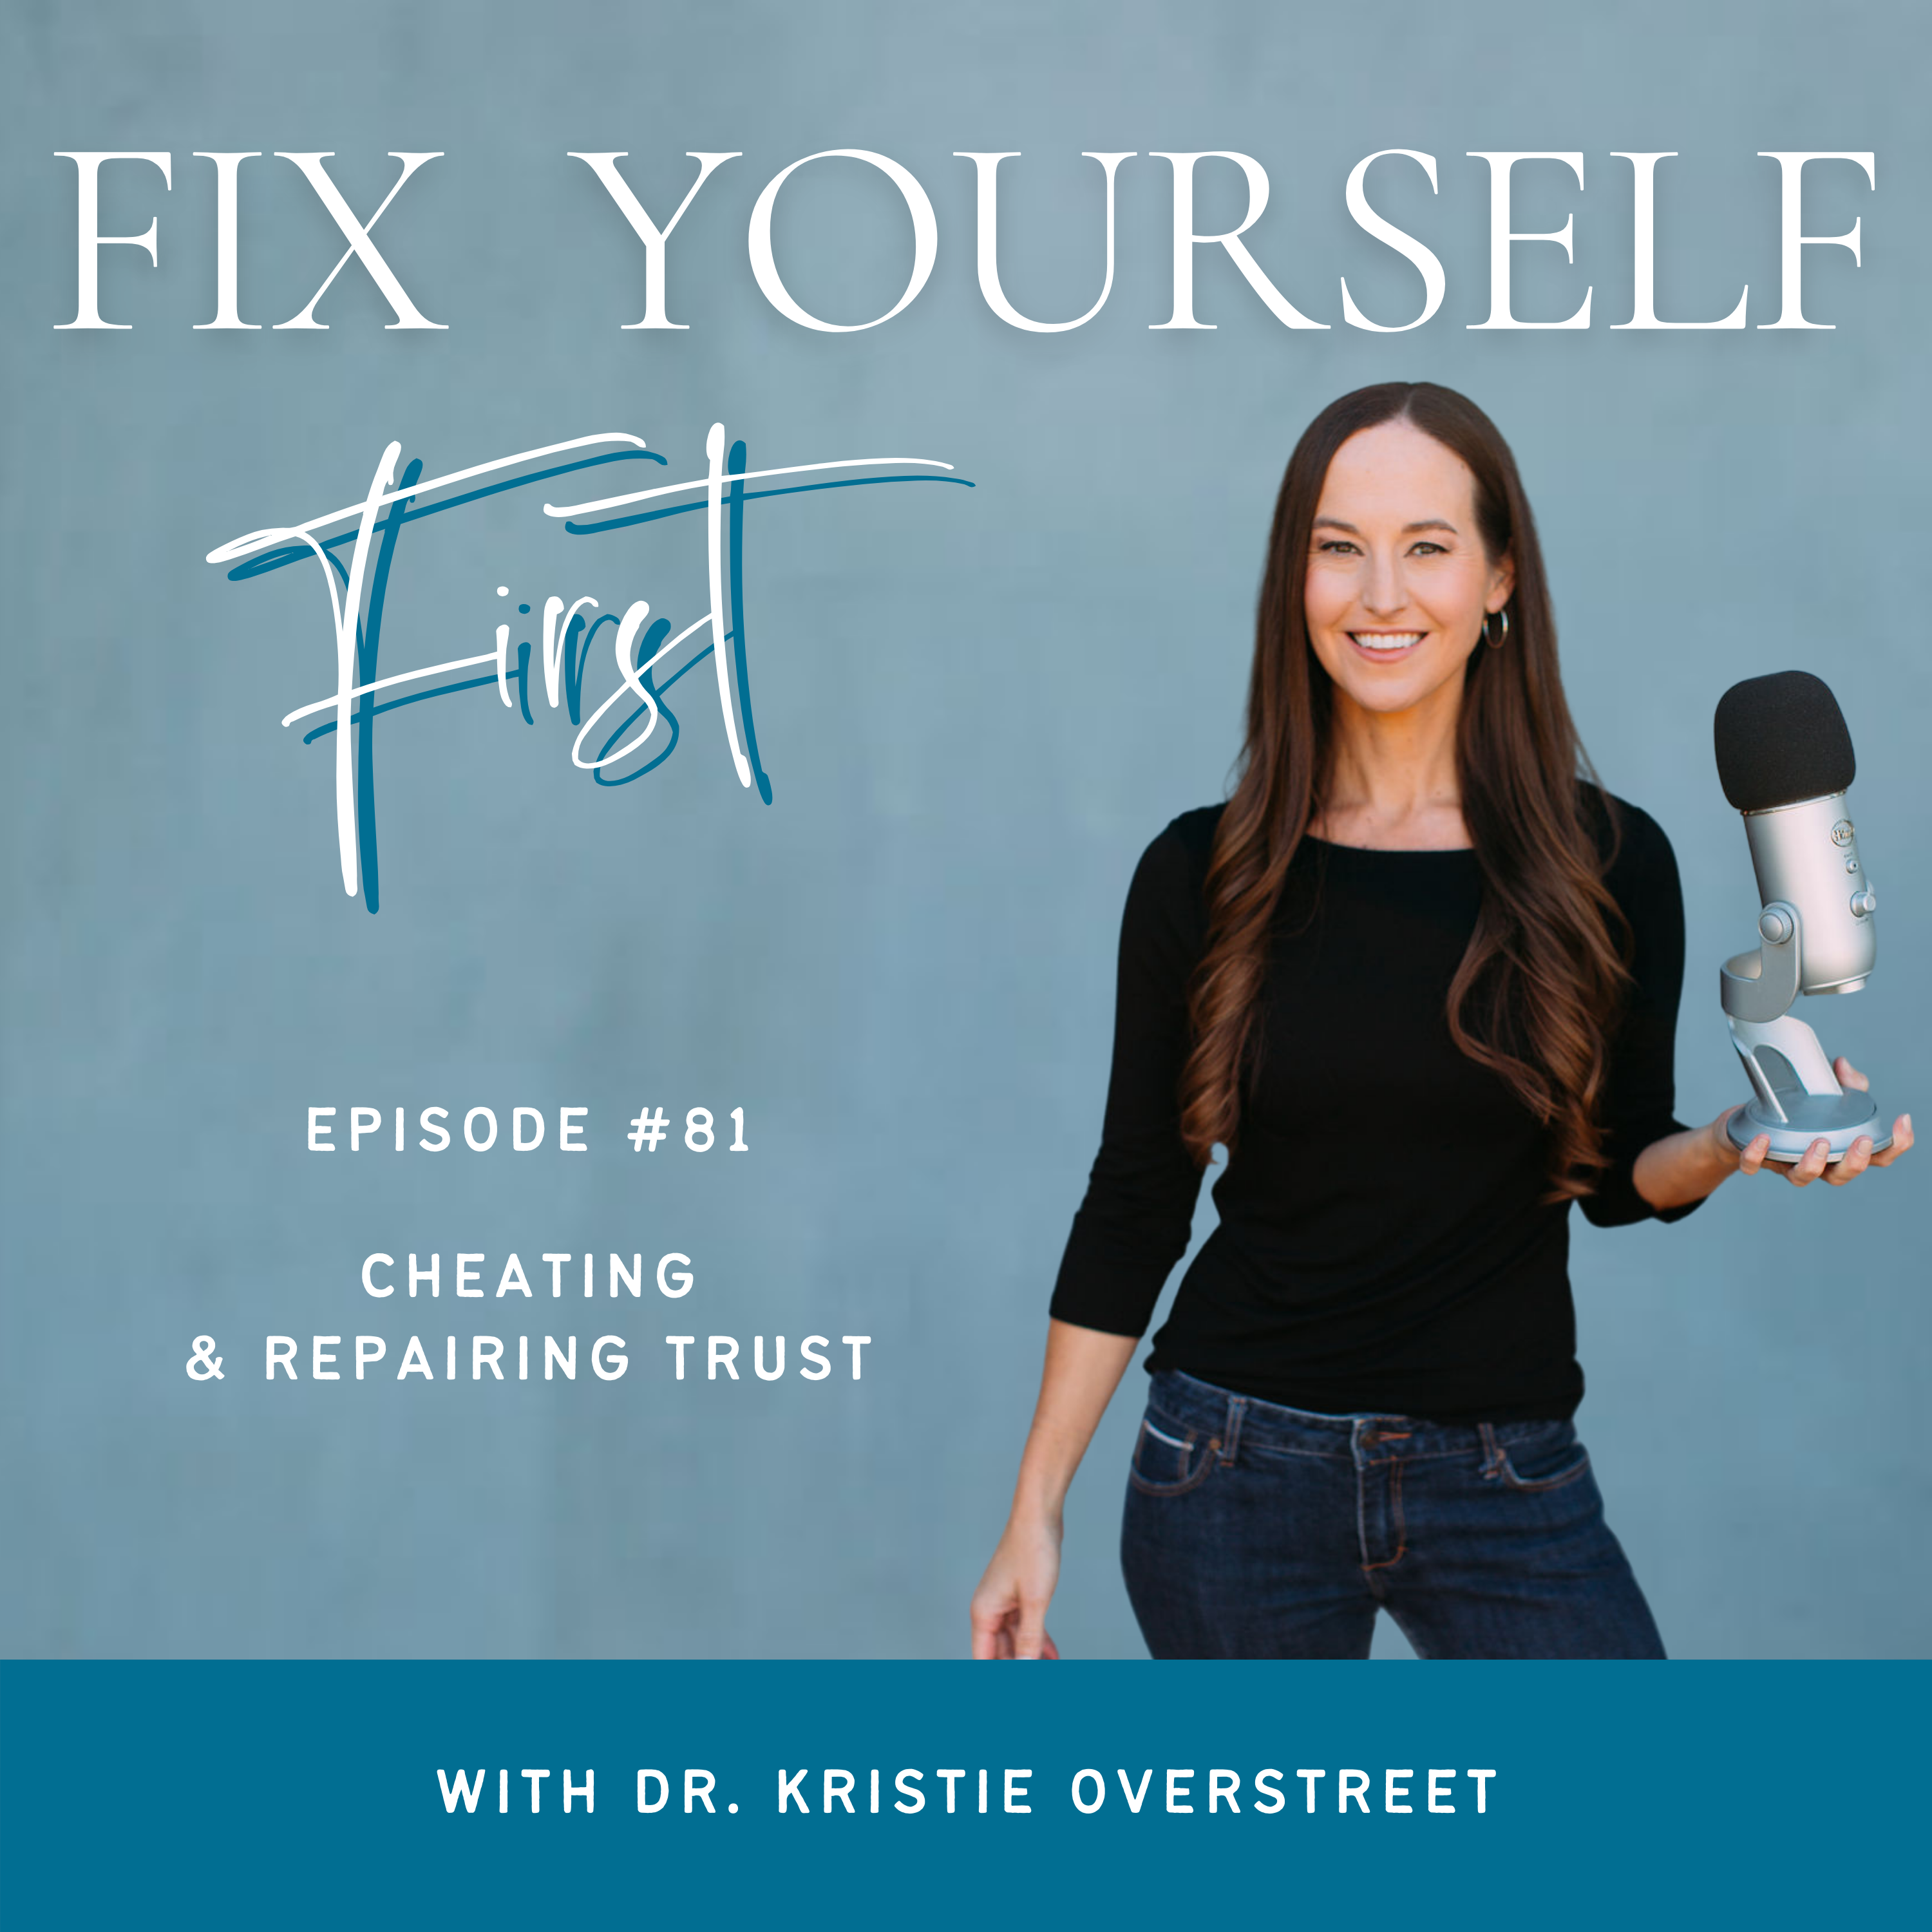 Fix-Yourself-First-Episode-81-Cheating-Repairing-Trust